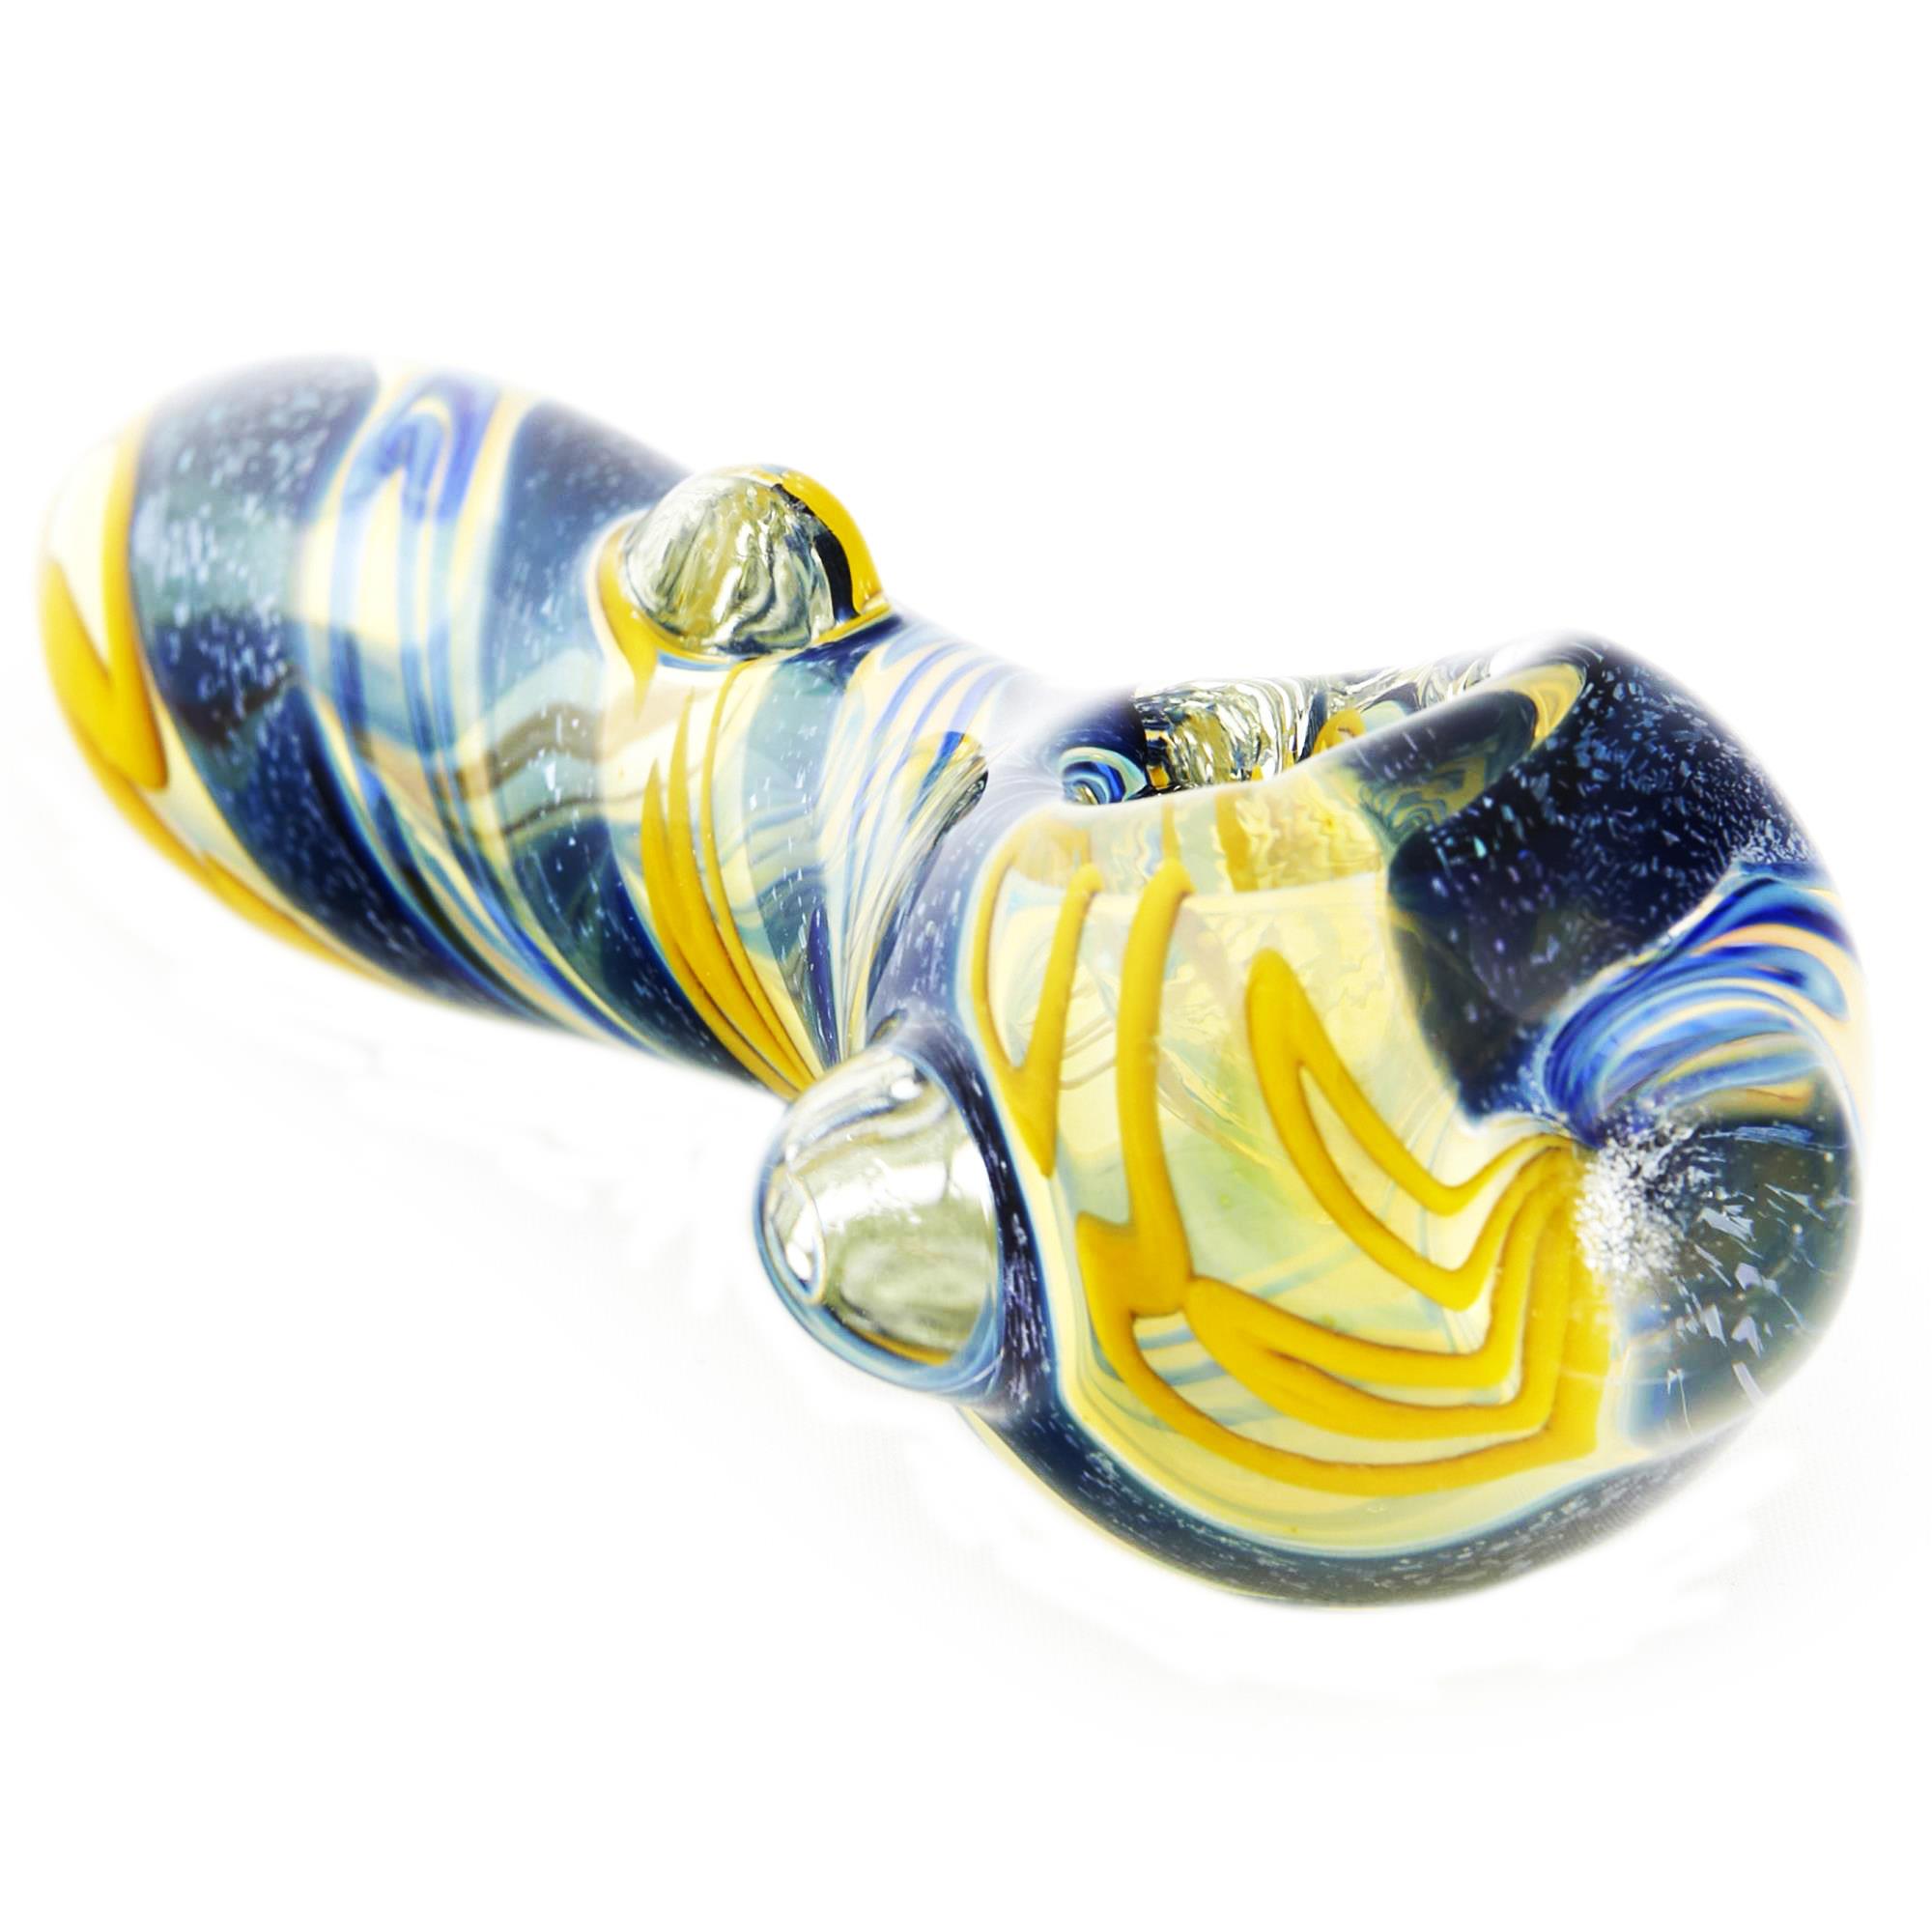 LIGHT ME UP SPOON PIPE